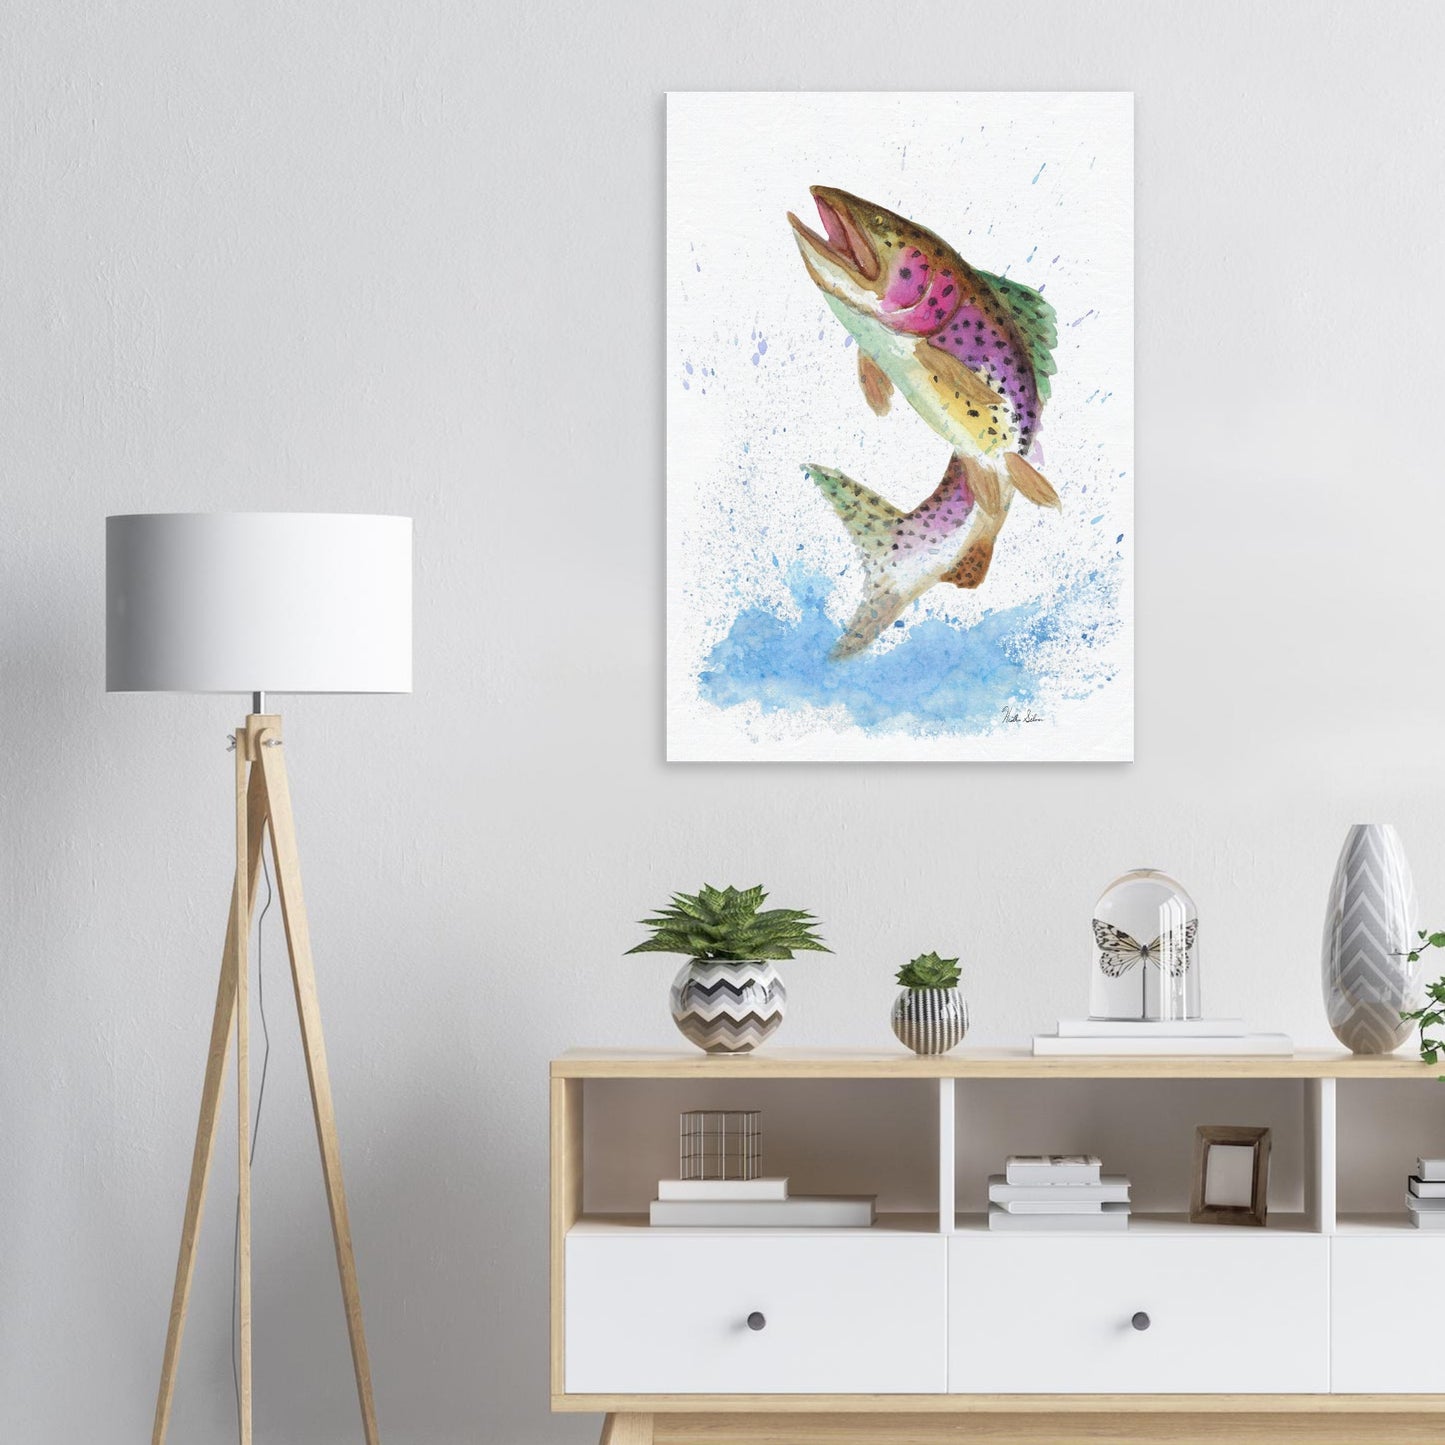 28 by 40 inch slim canvas wall art print featuring a watercolor painting of a rainbow trout leaping from the water. Shown on wall above wooden shelves, lamp, and potted plants.